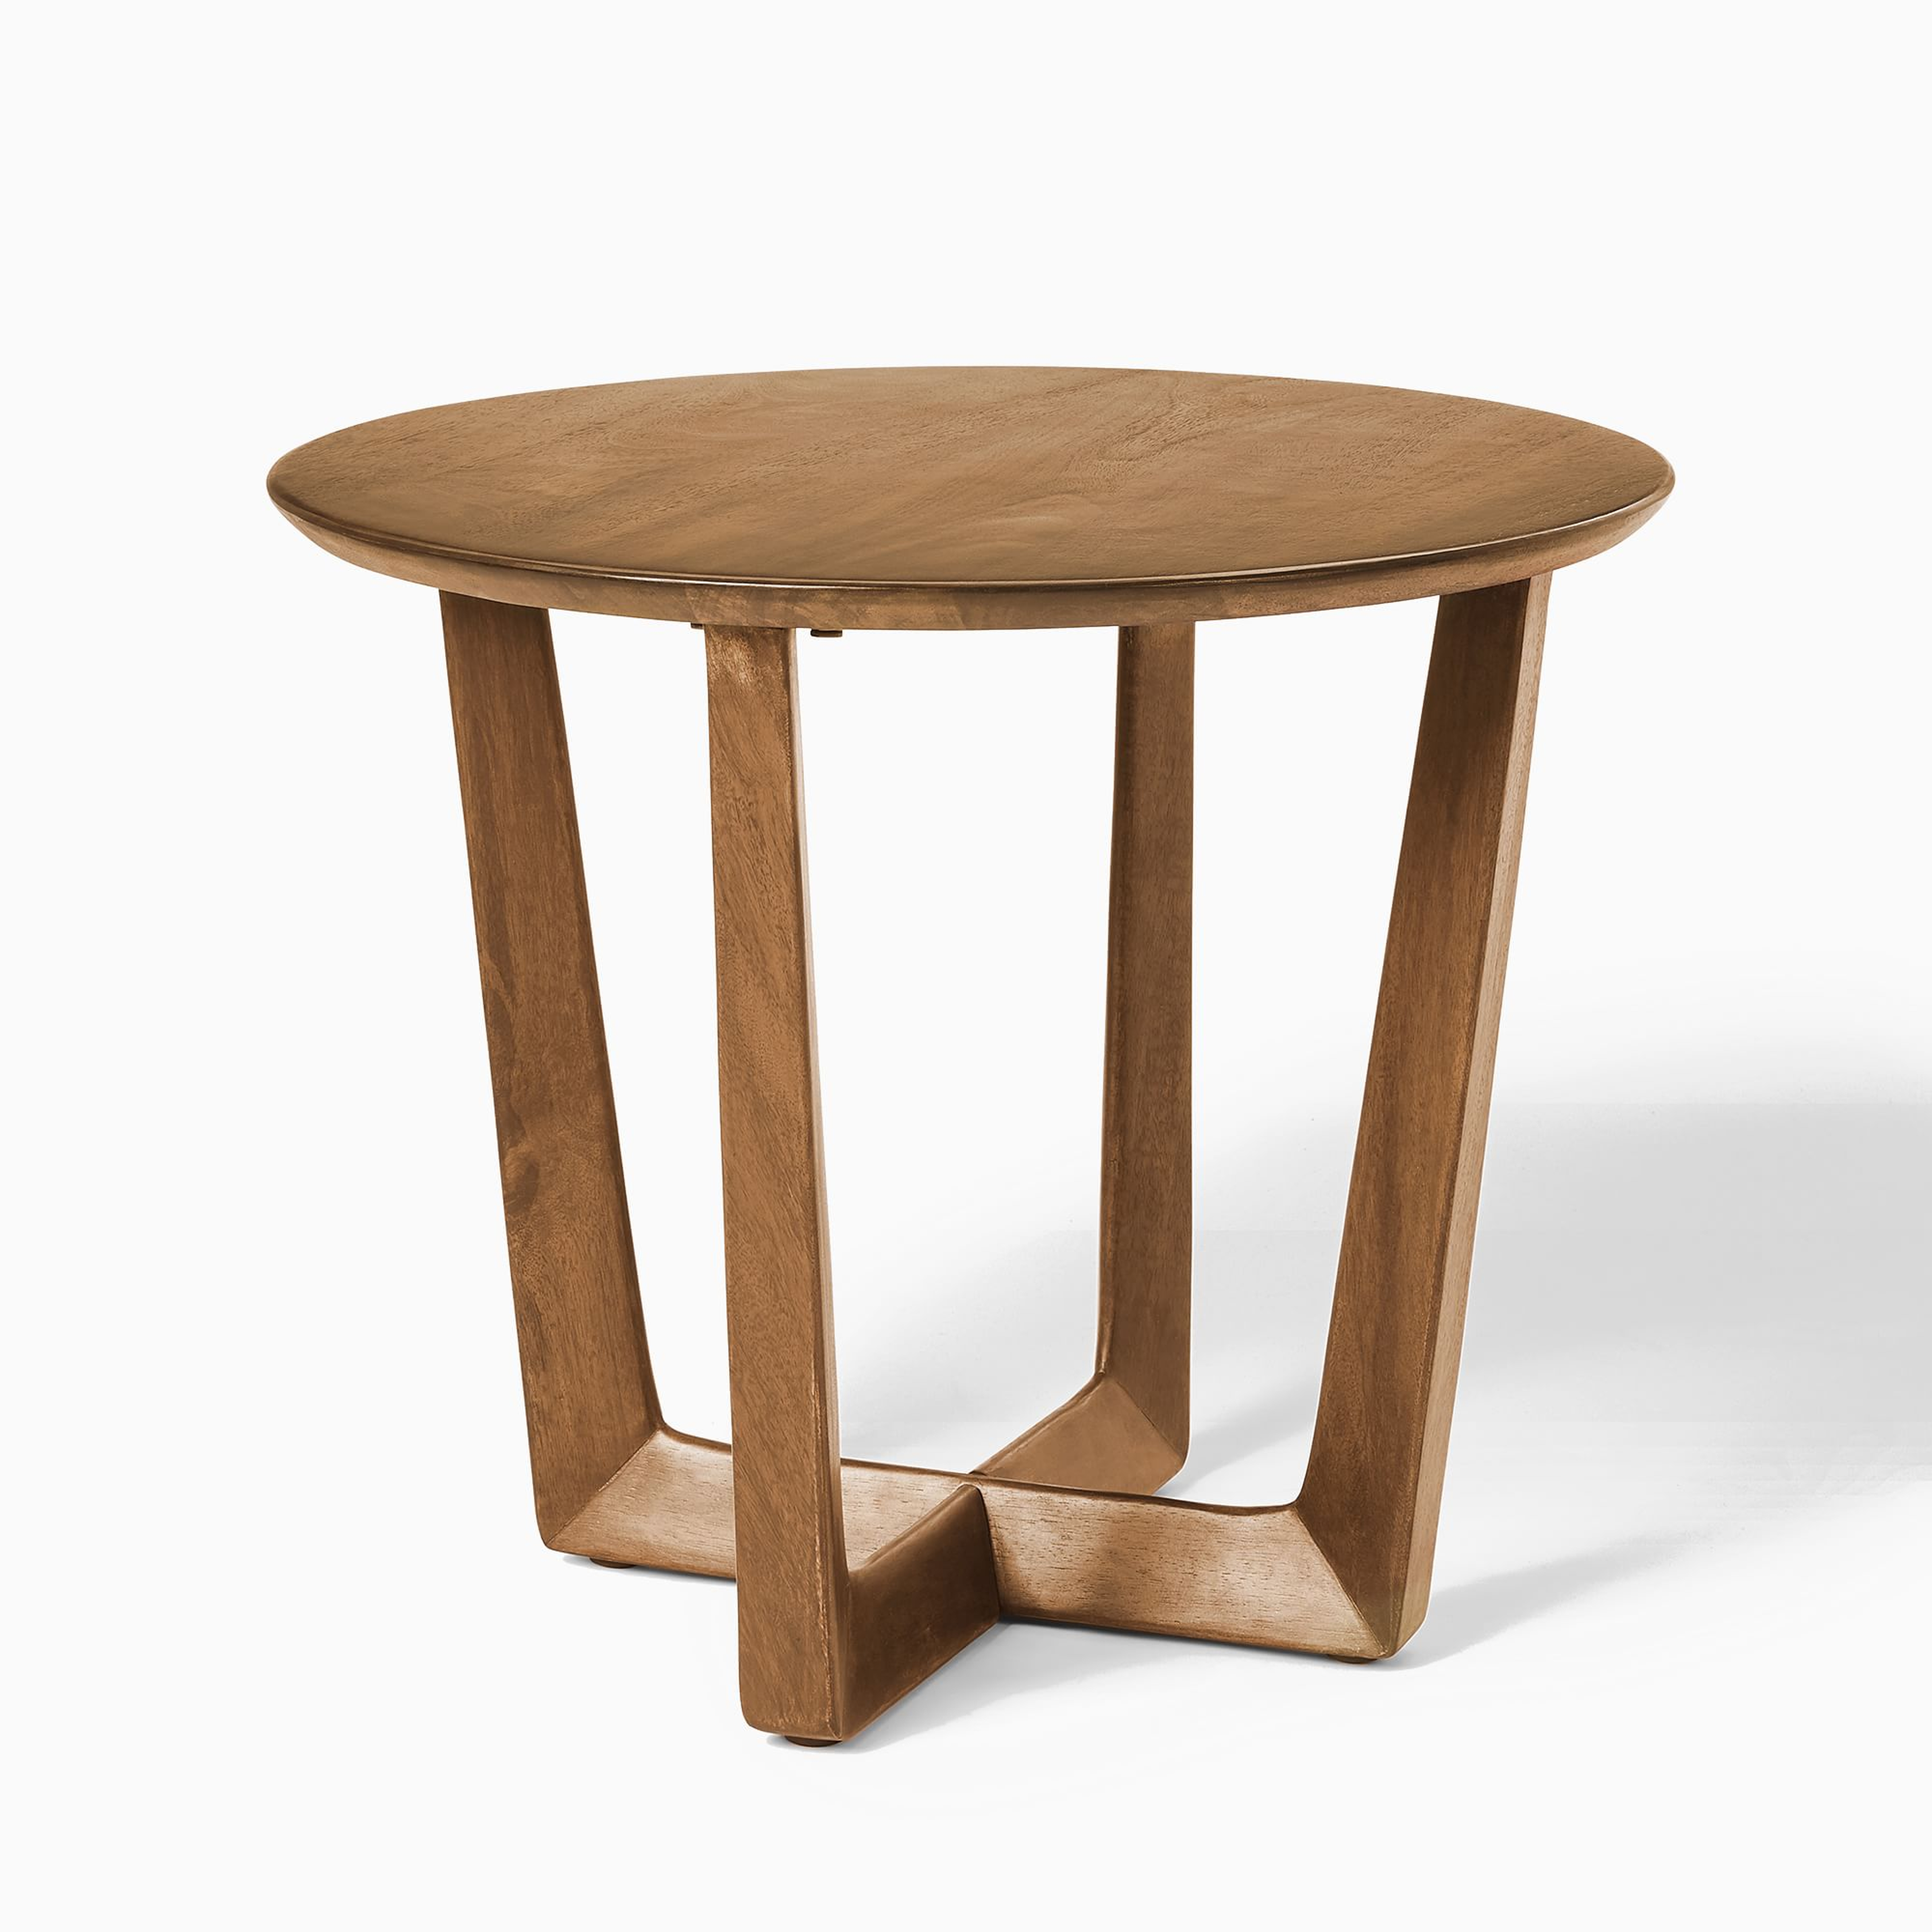 Stowe Cool Walnut Round Side Table - West Elm